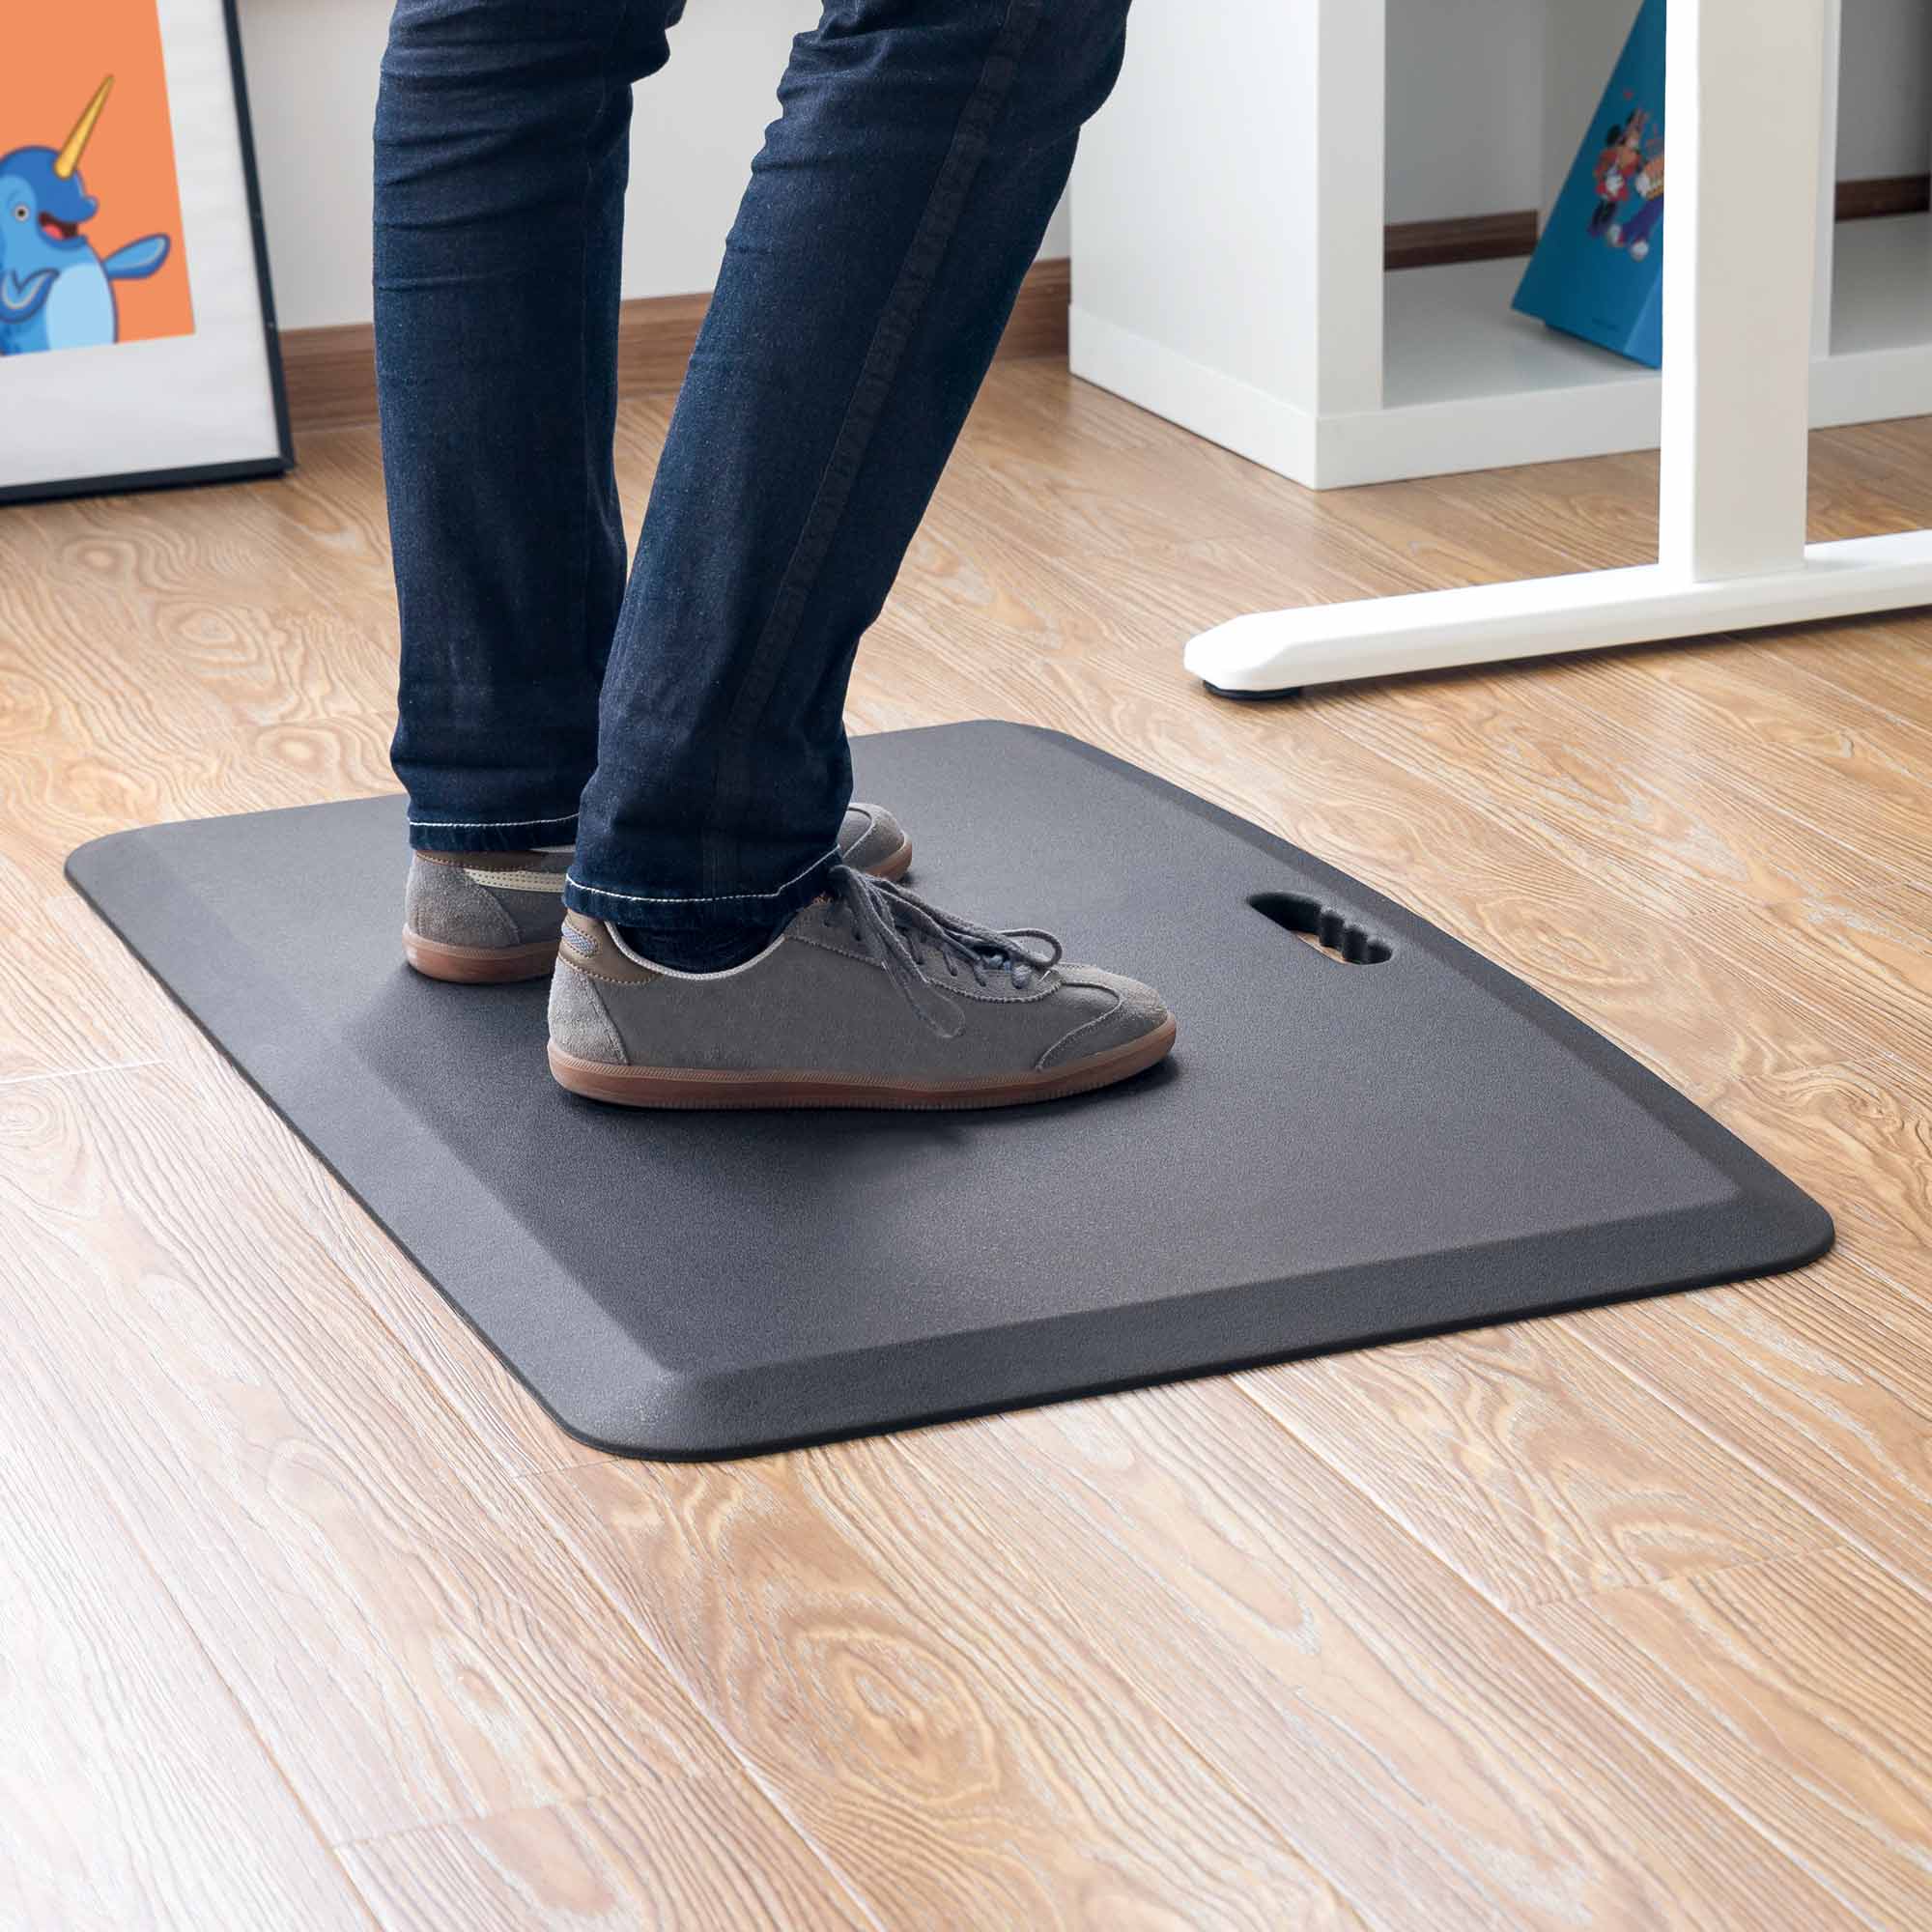 Stand & Spin Anti-Fatigue Mat, Ergonomic Desk Mat with 360 Degree Rotating